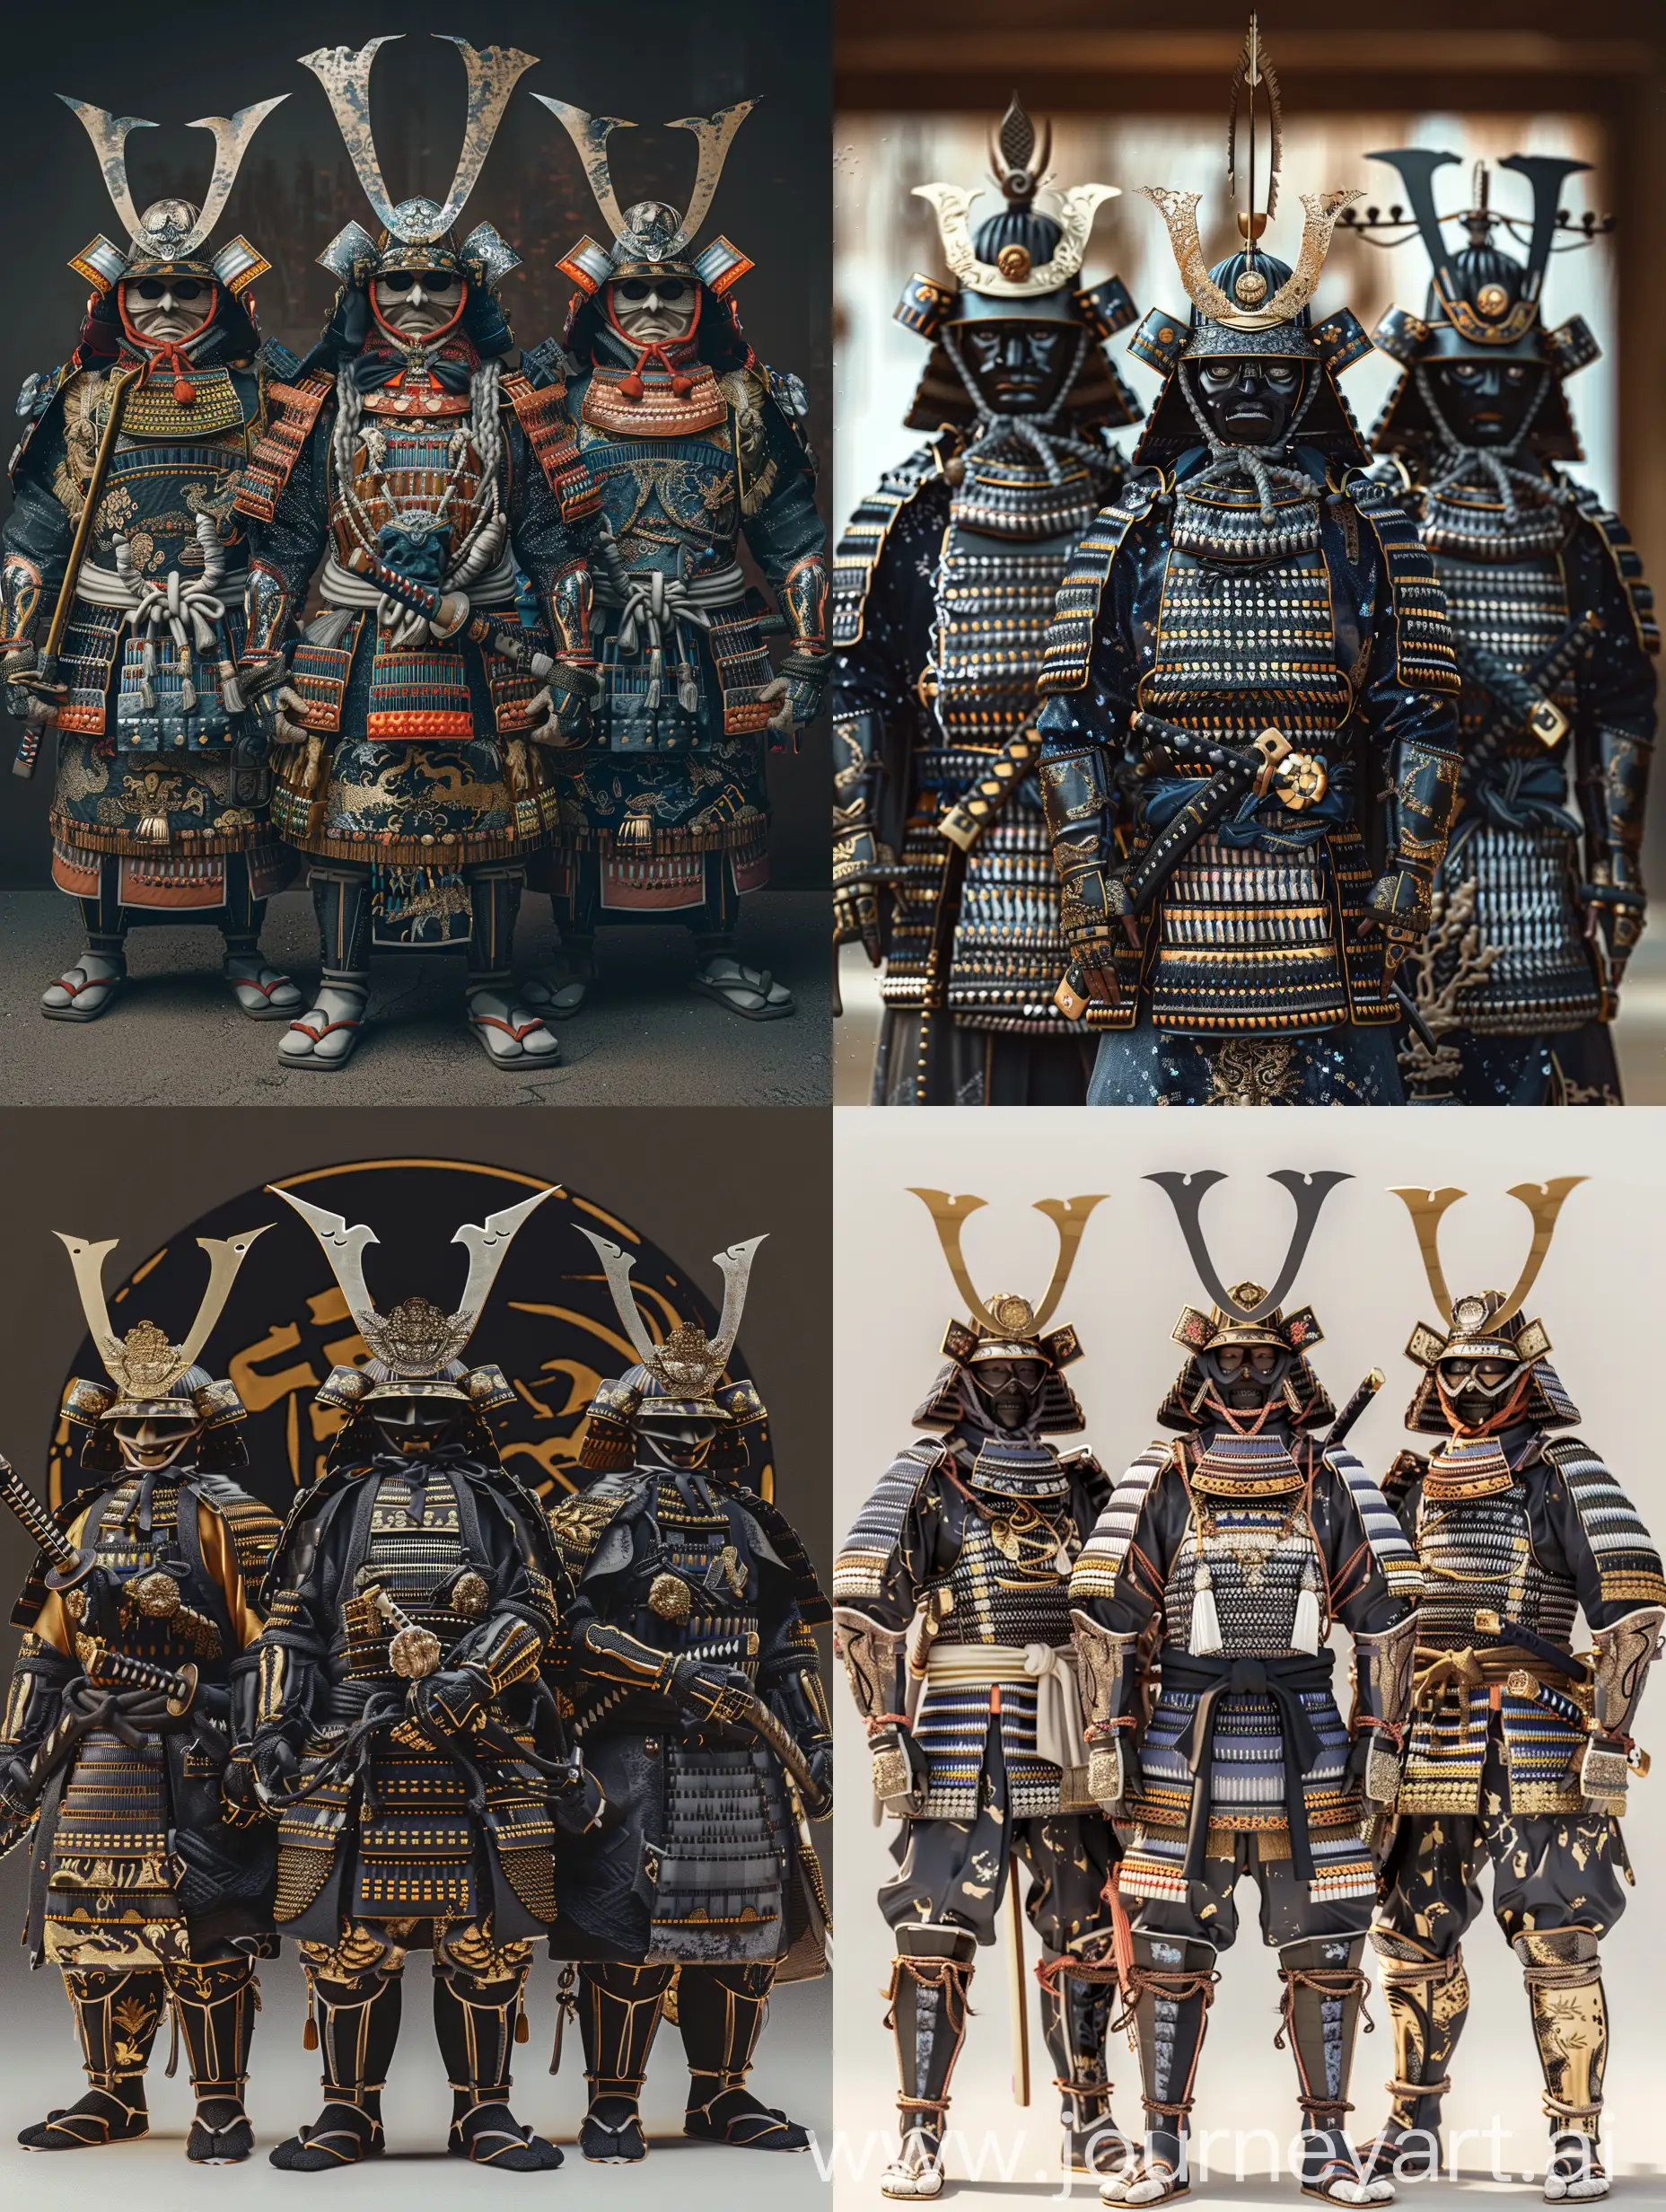 Real trio samurai royalty armour, very intricated details, hyper-realistic, 3d, Editorial